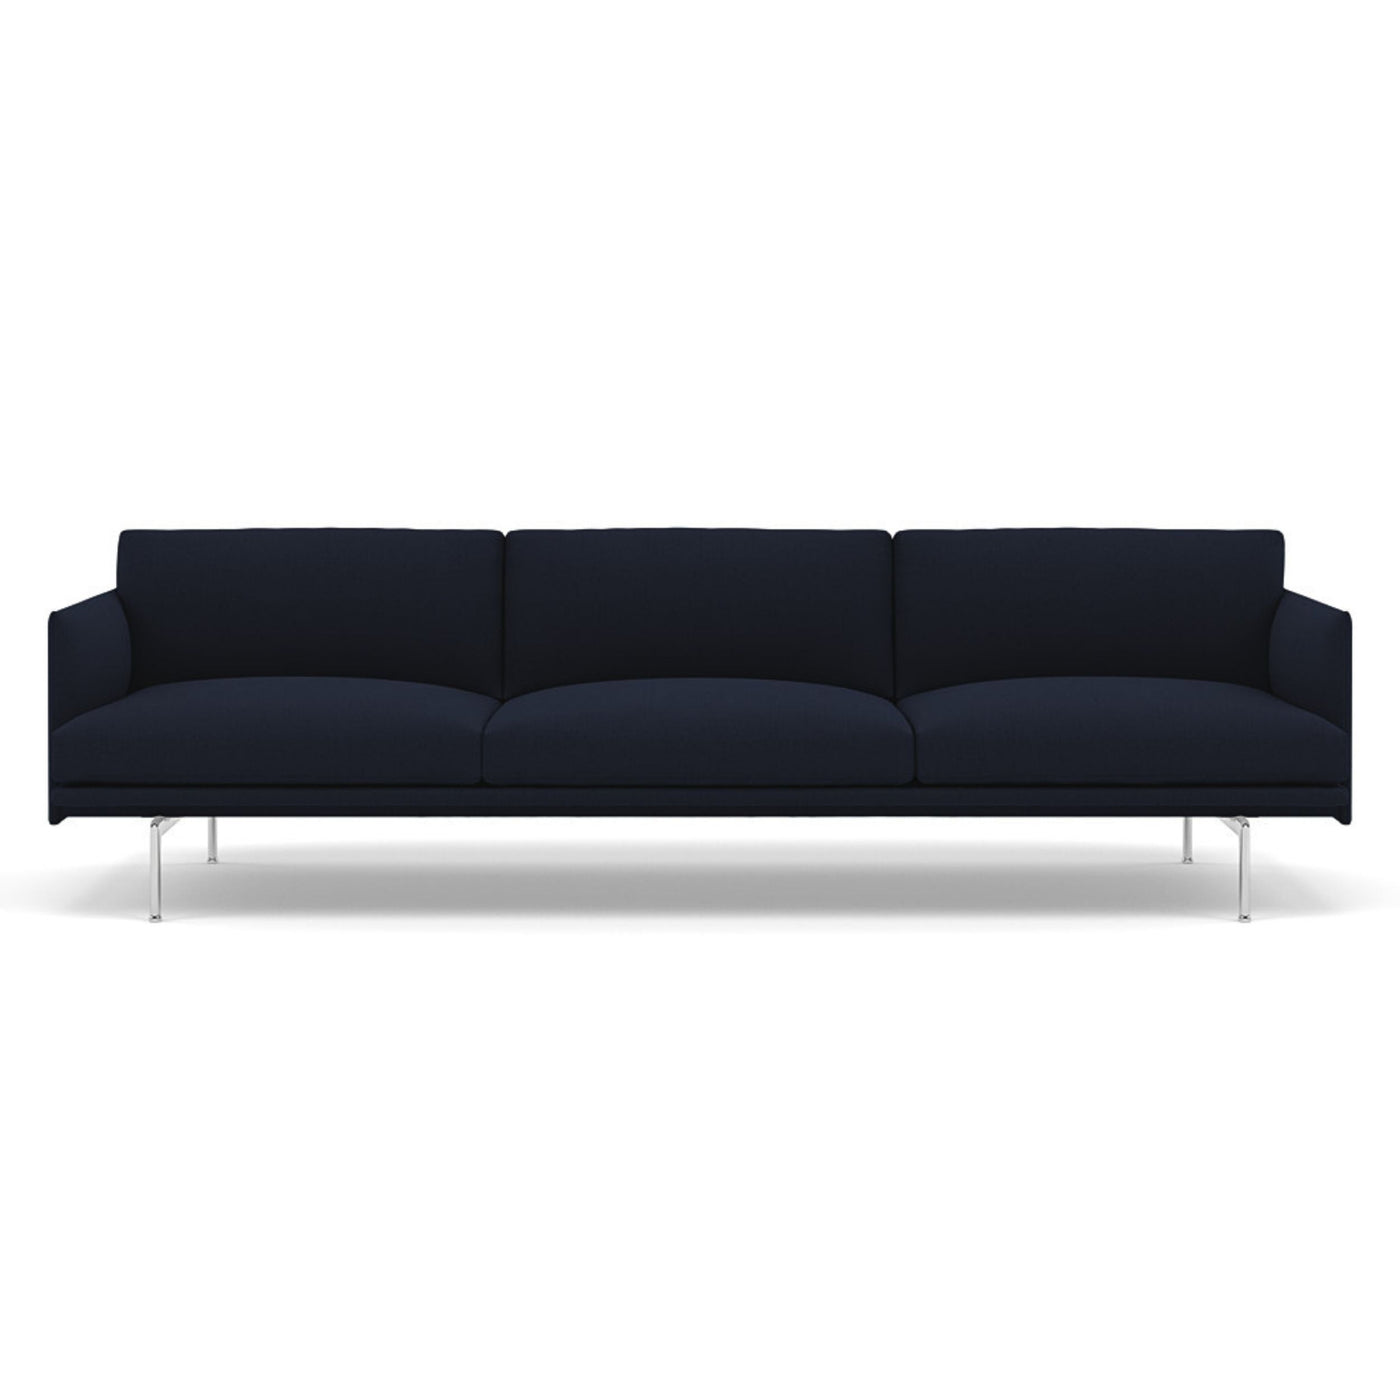 muuto outline 3.5 seater sofa in vidar 554 blue and polished aluminium legs. Made to order from someday designs. #colour_vidar-554